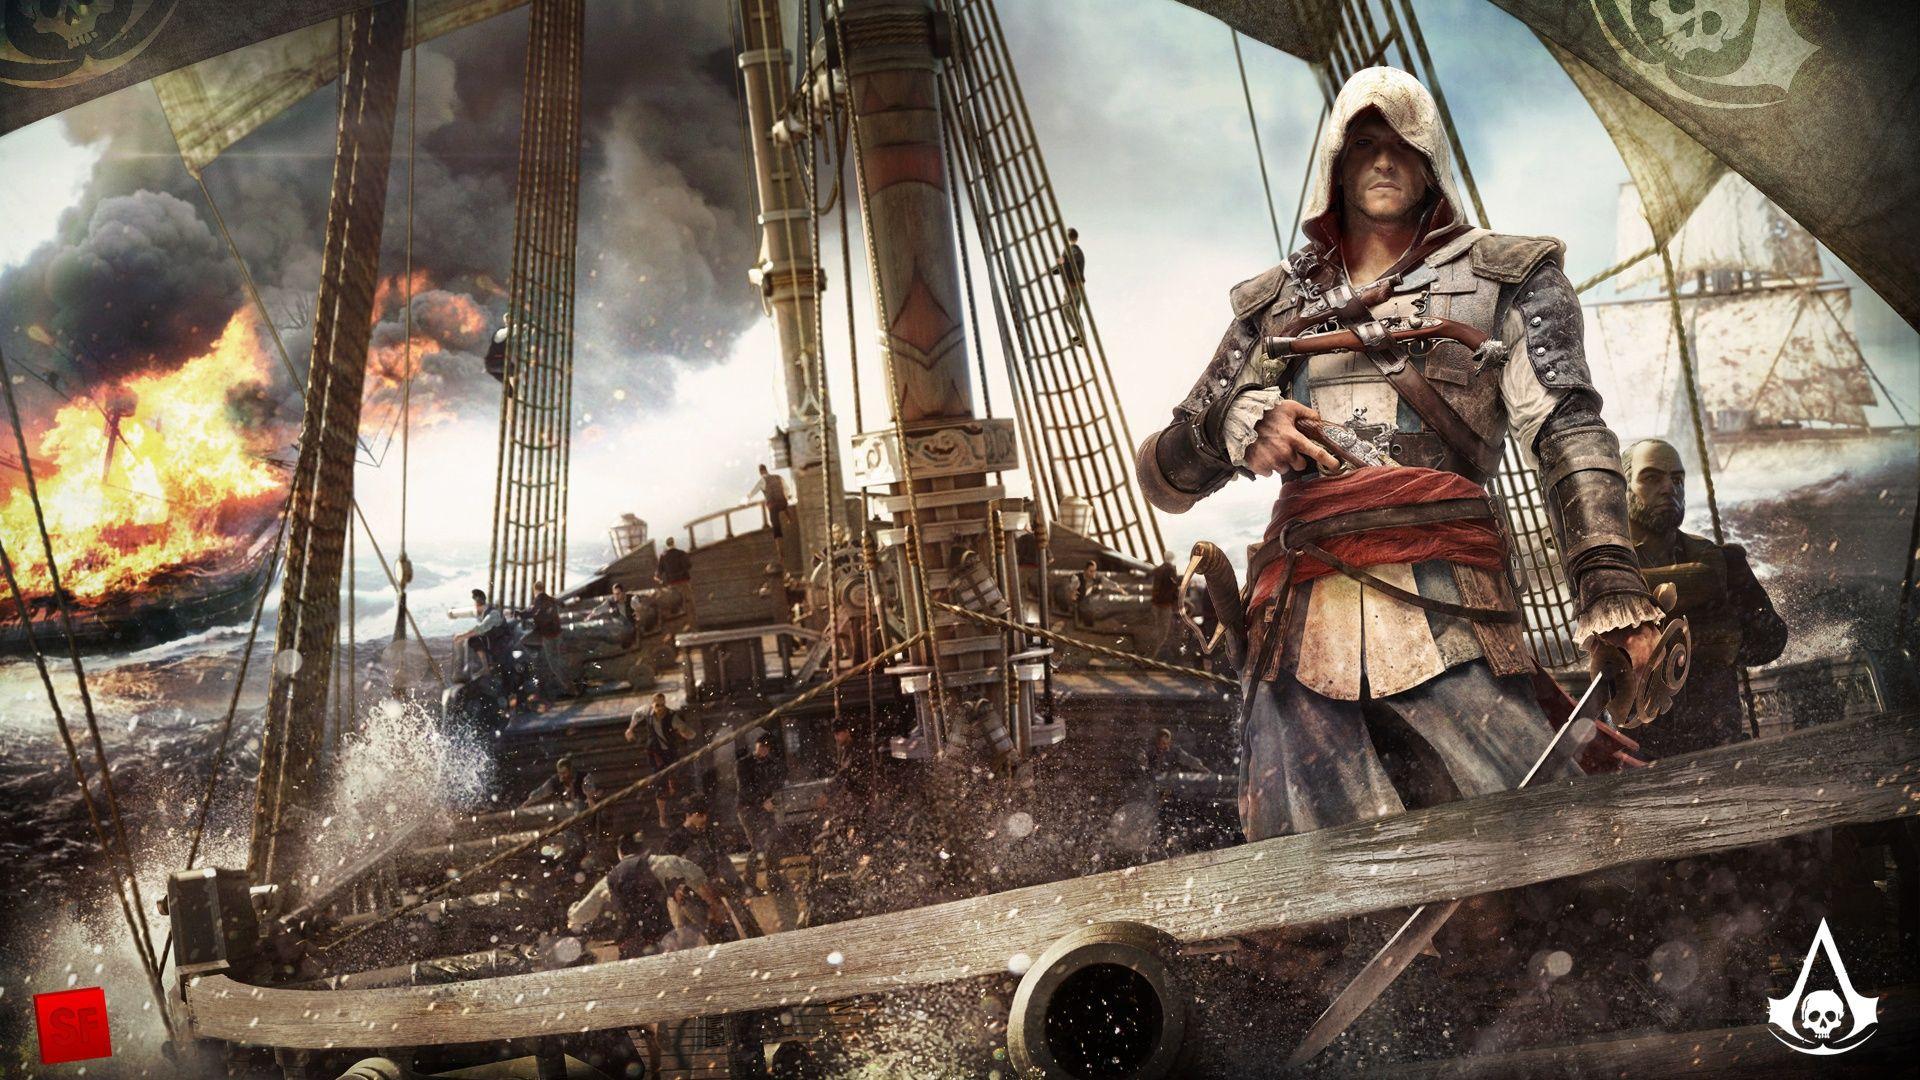 Assassin's creed IV: Black flag wallpaper and image